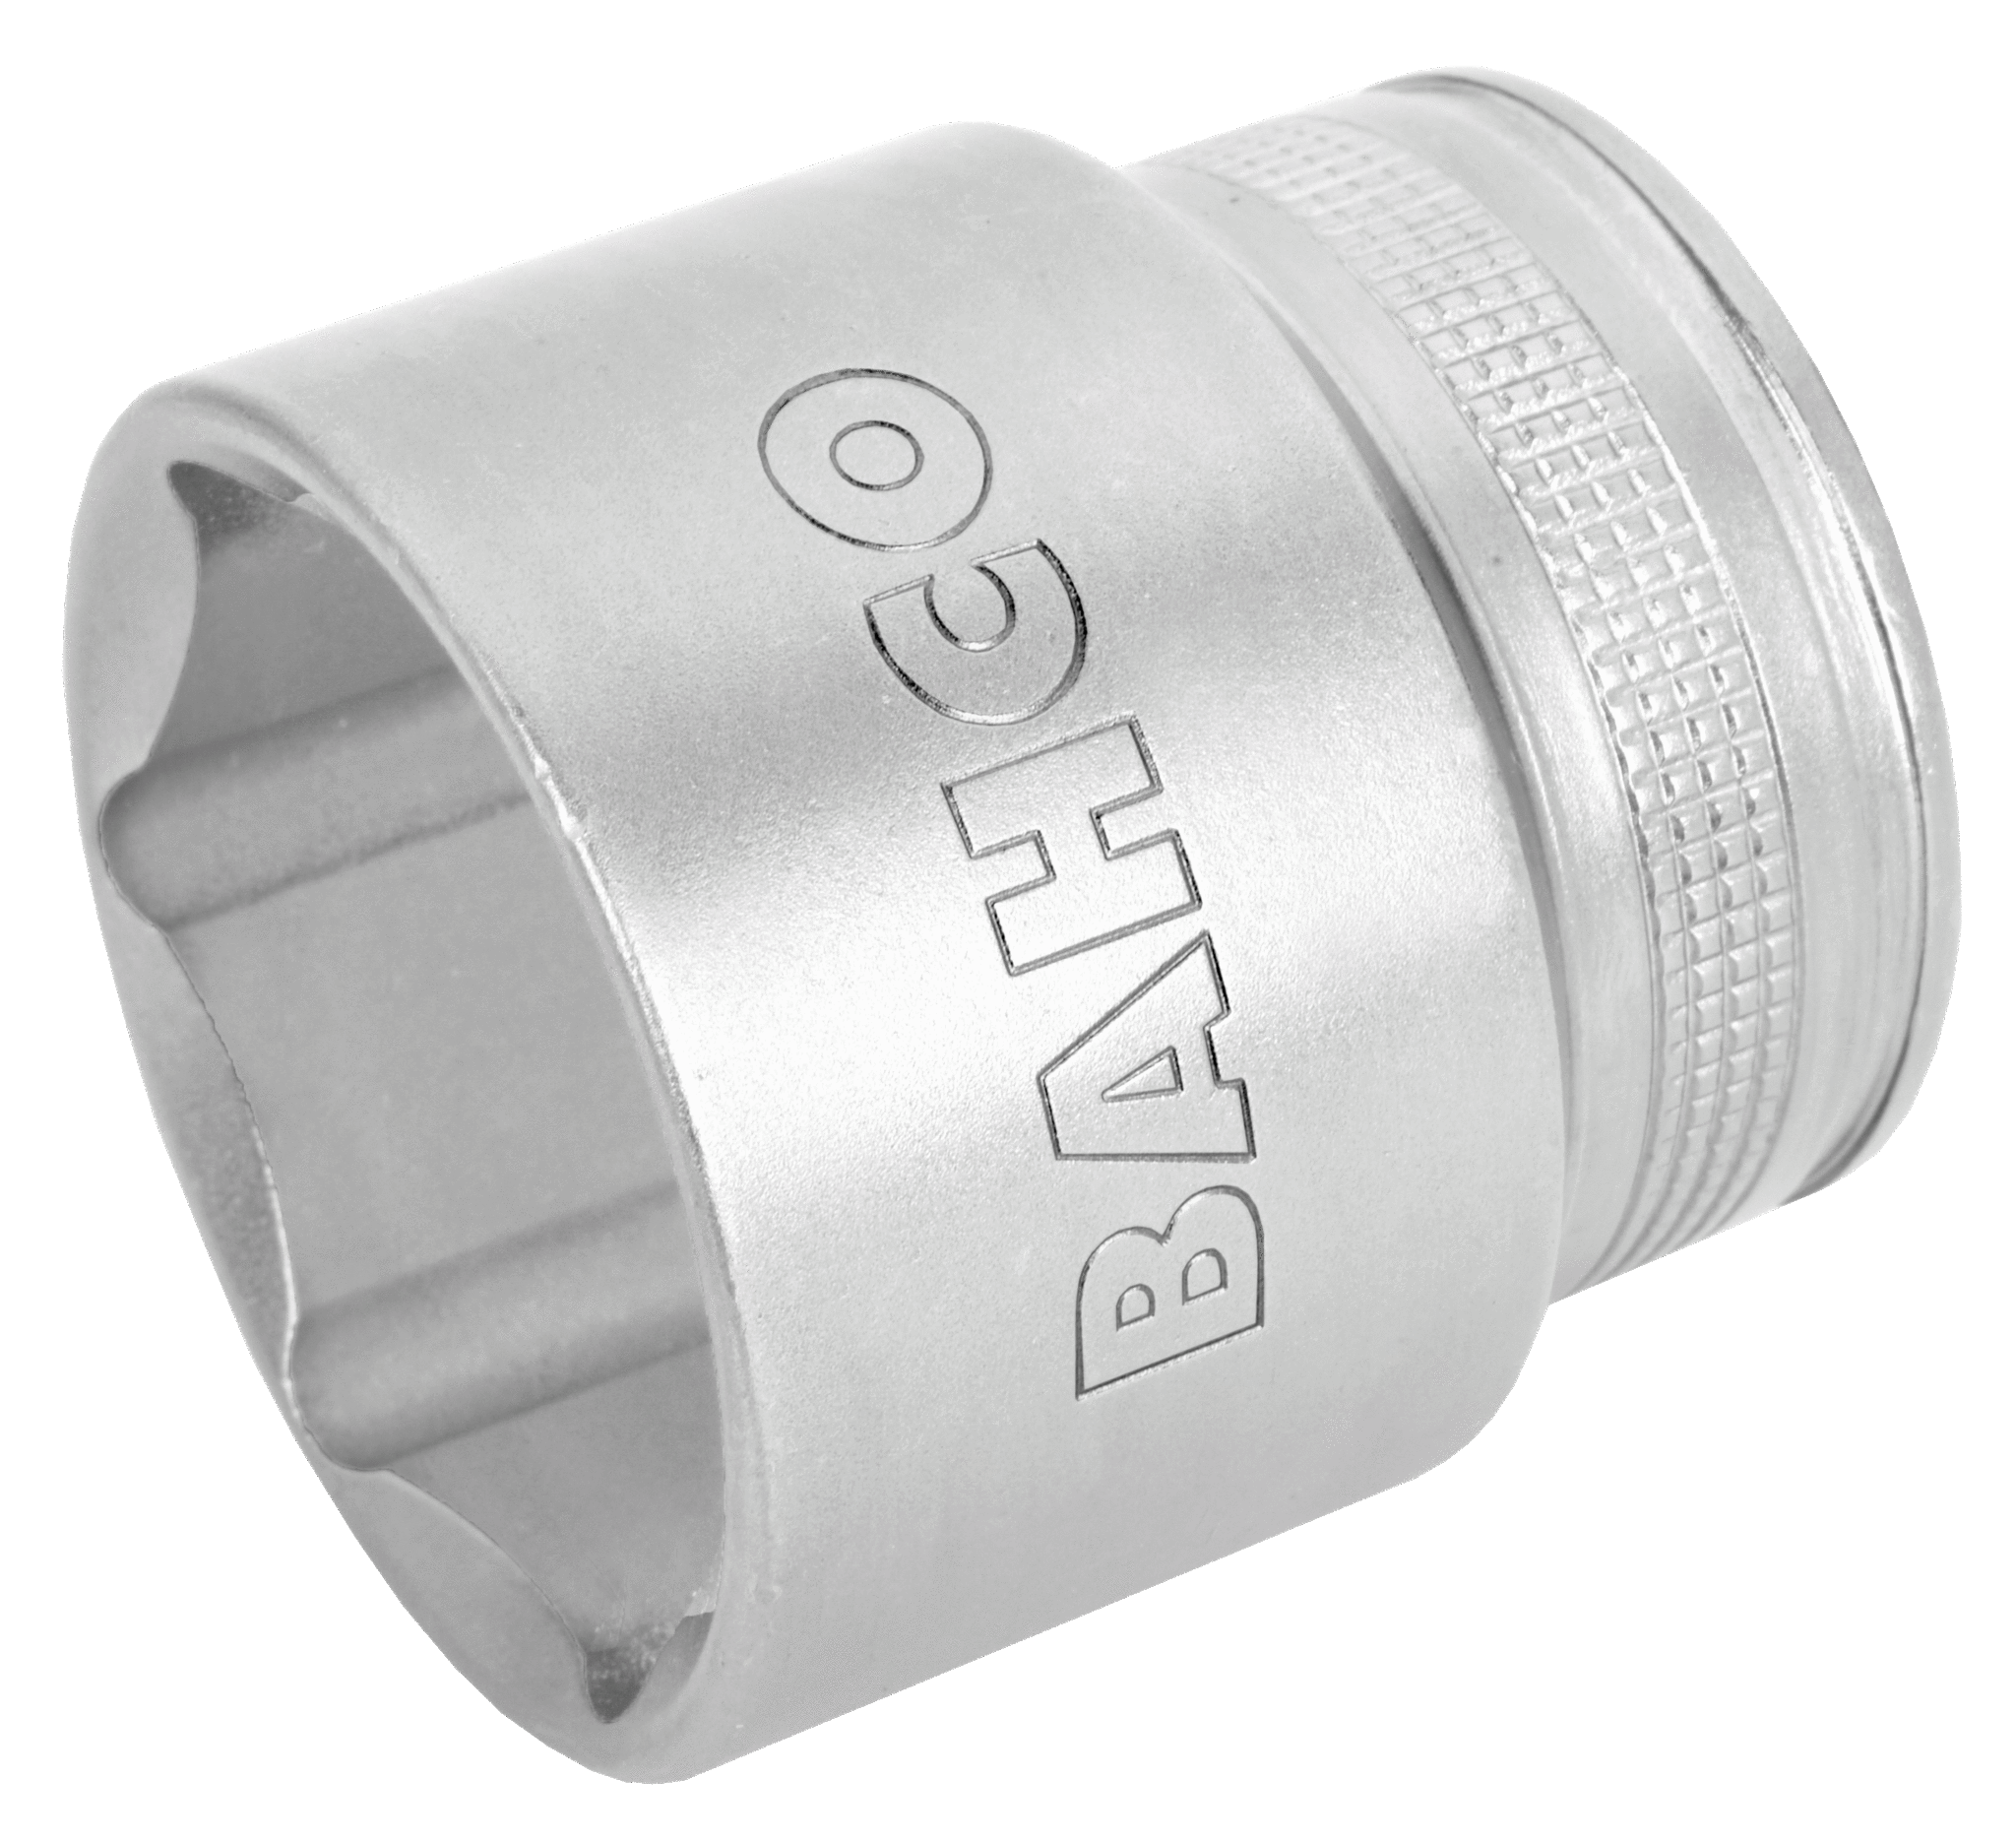 Bahco BAHCO 19mm IMPACT RATED SOCKET  1/2" SQUARE DRIVE TOP QUALITY LOOSE 